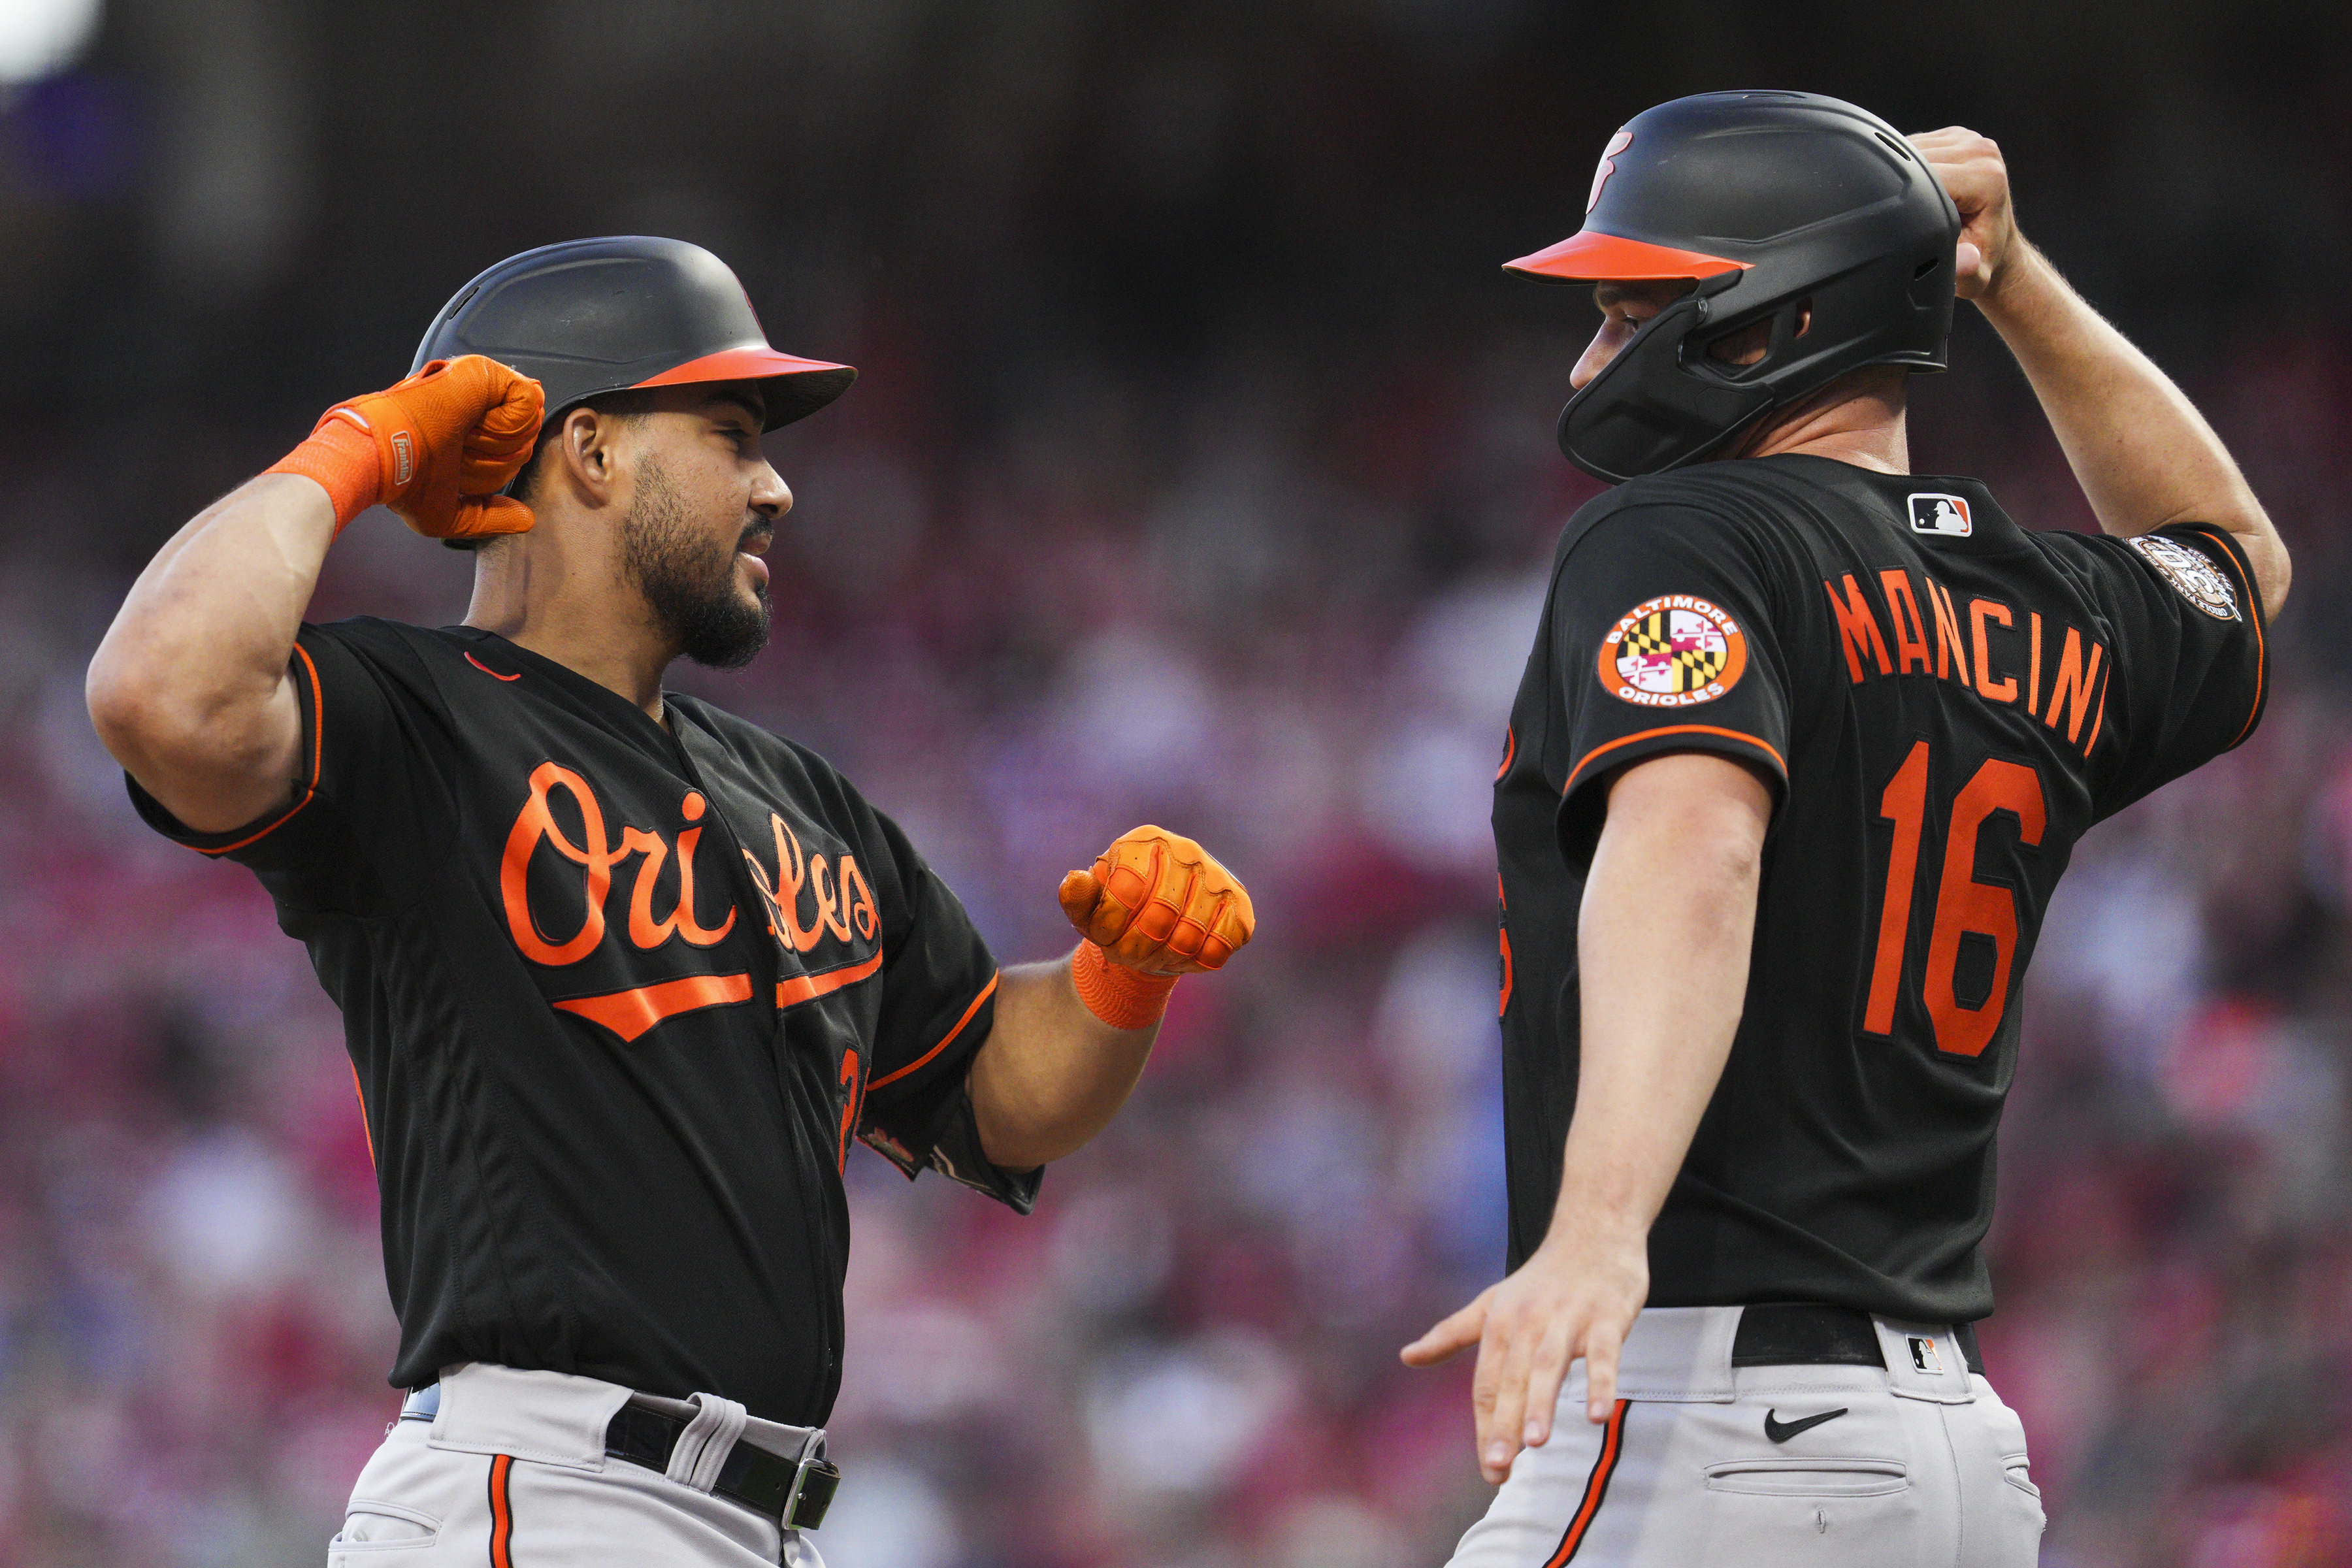 Orioles score 4 in 9th to beat Reds, 6-2, remain above .500 at 100-game mark for first time since 2016